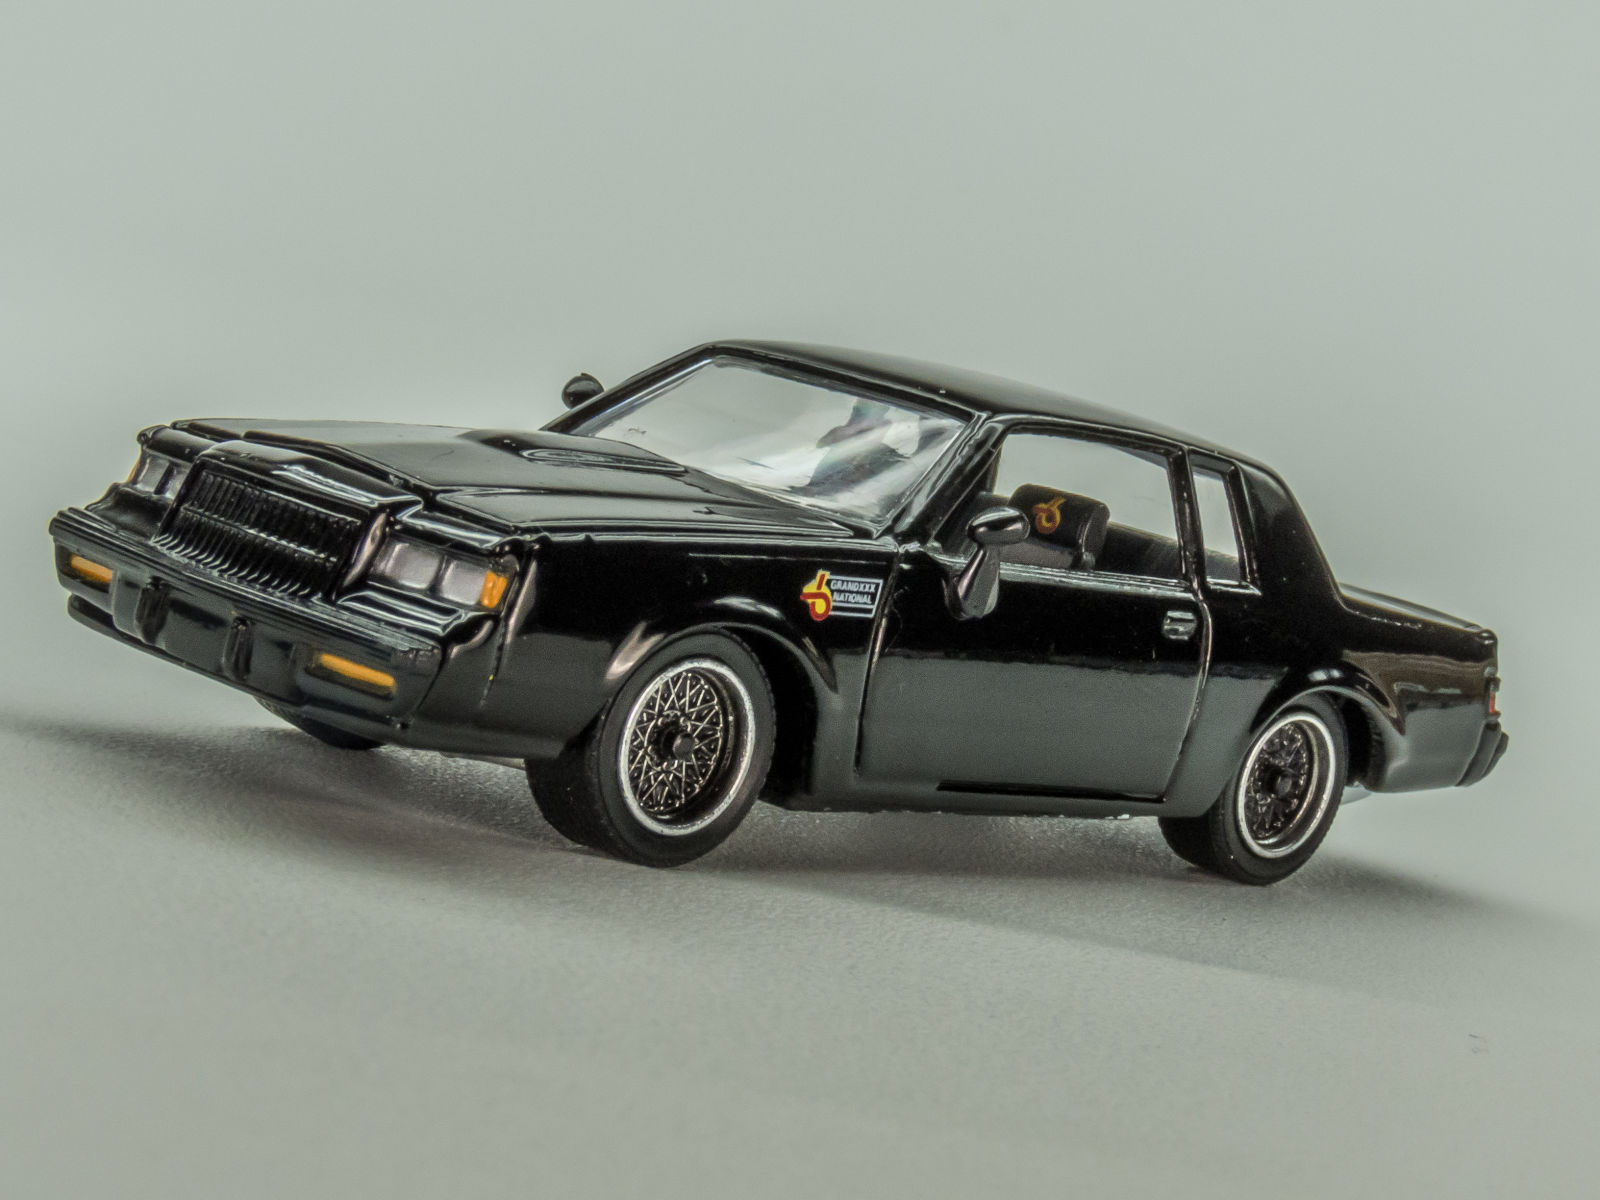 Illustration for article titled Ertl 1987 Buick Grand National 1:64 Scale Semi-Custom. Very picture heavy post....